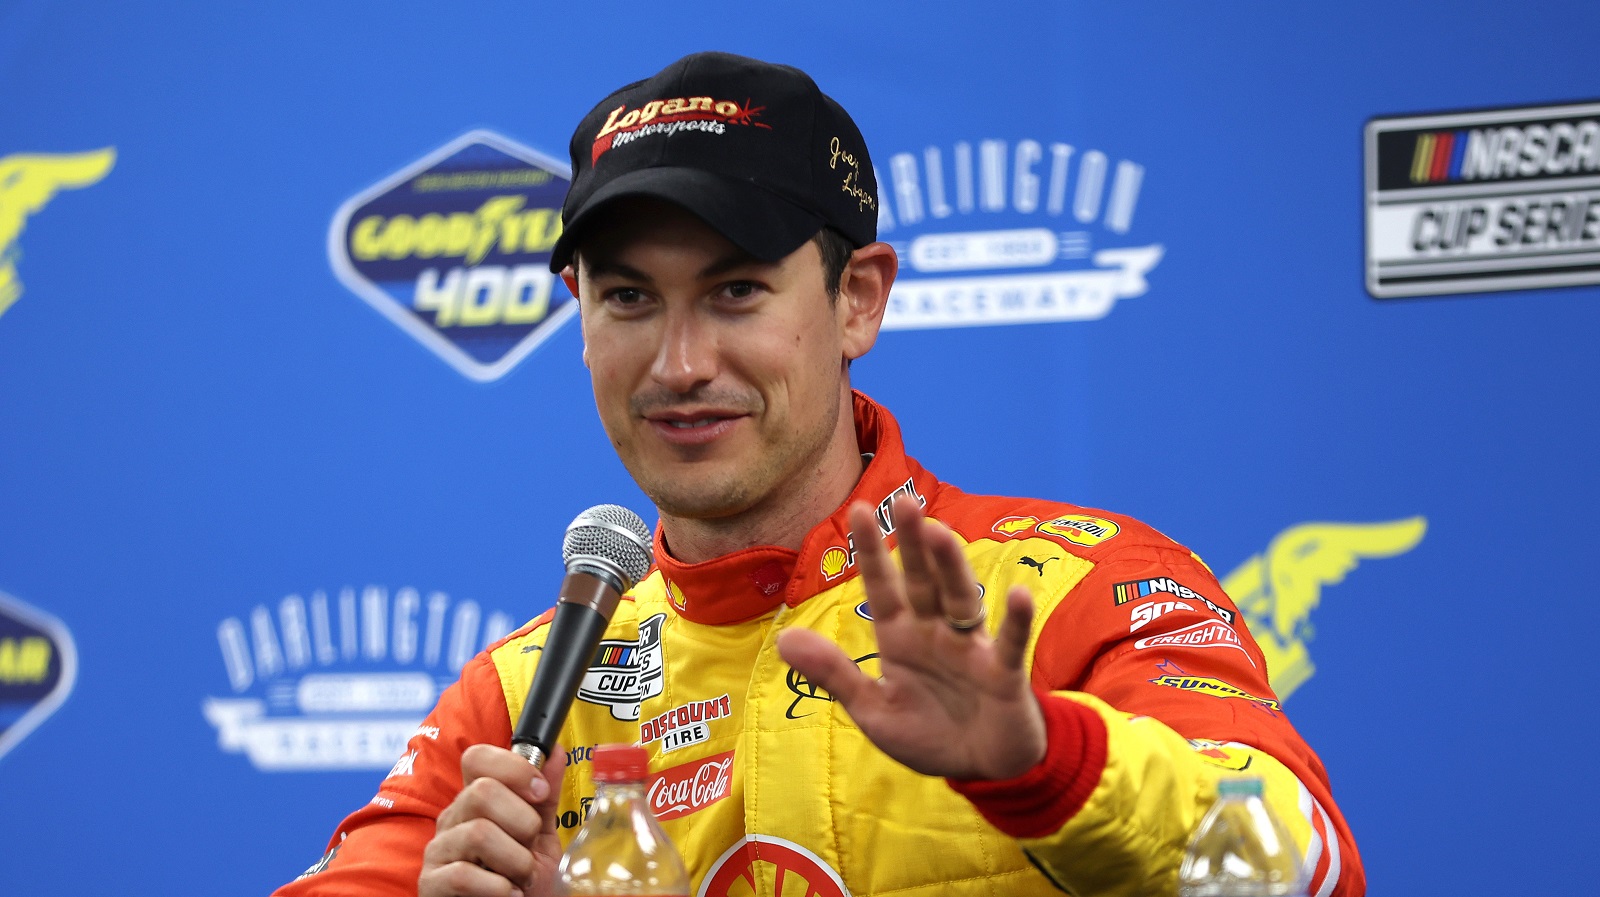 ‘Idiot’ and ‘Moron’ Were the Nicest Words William Byron Could Muster in Describing Joey Logano After Their Late-Race Tangle